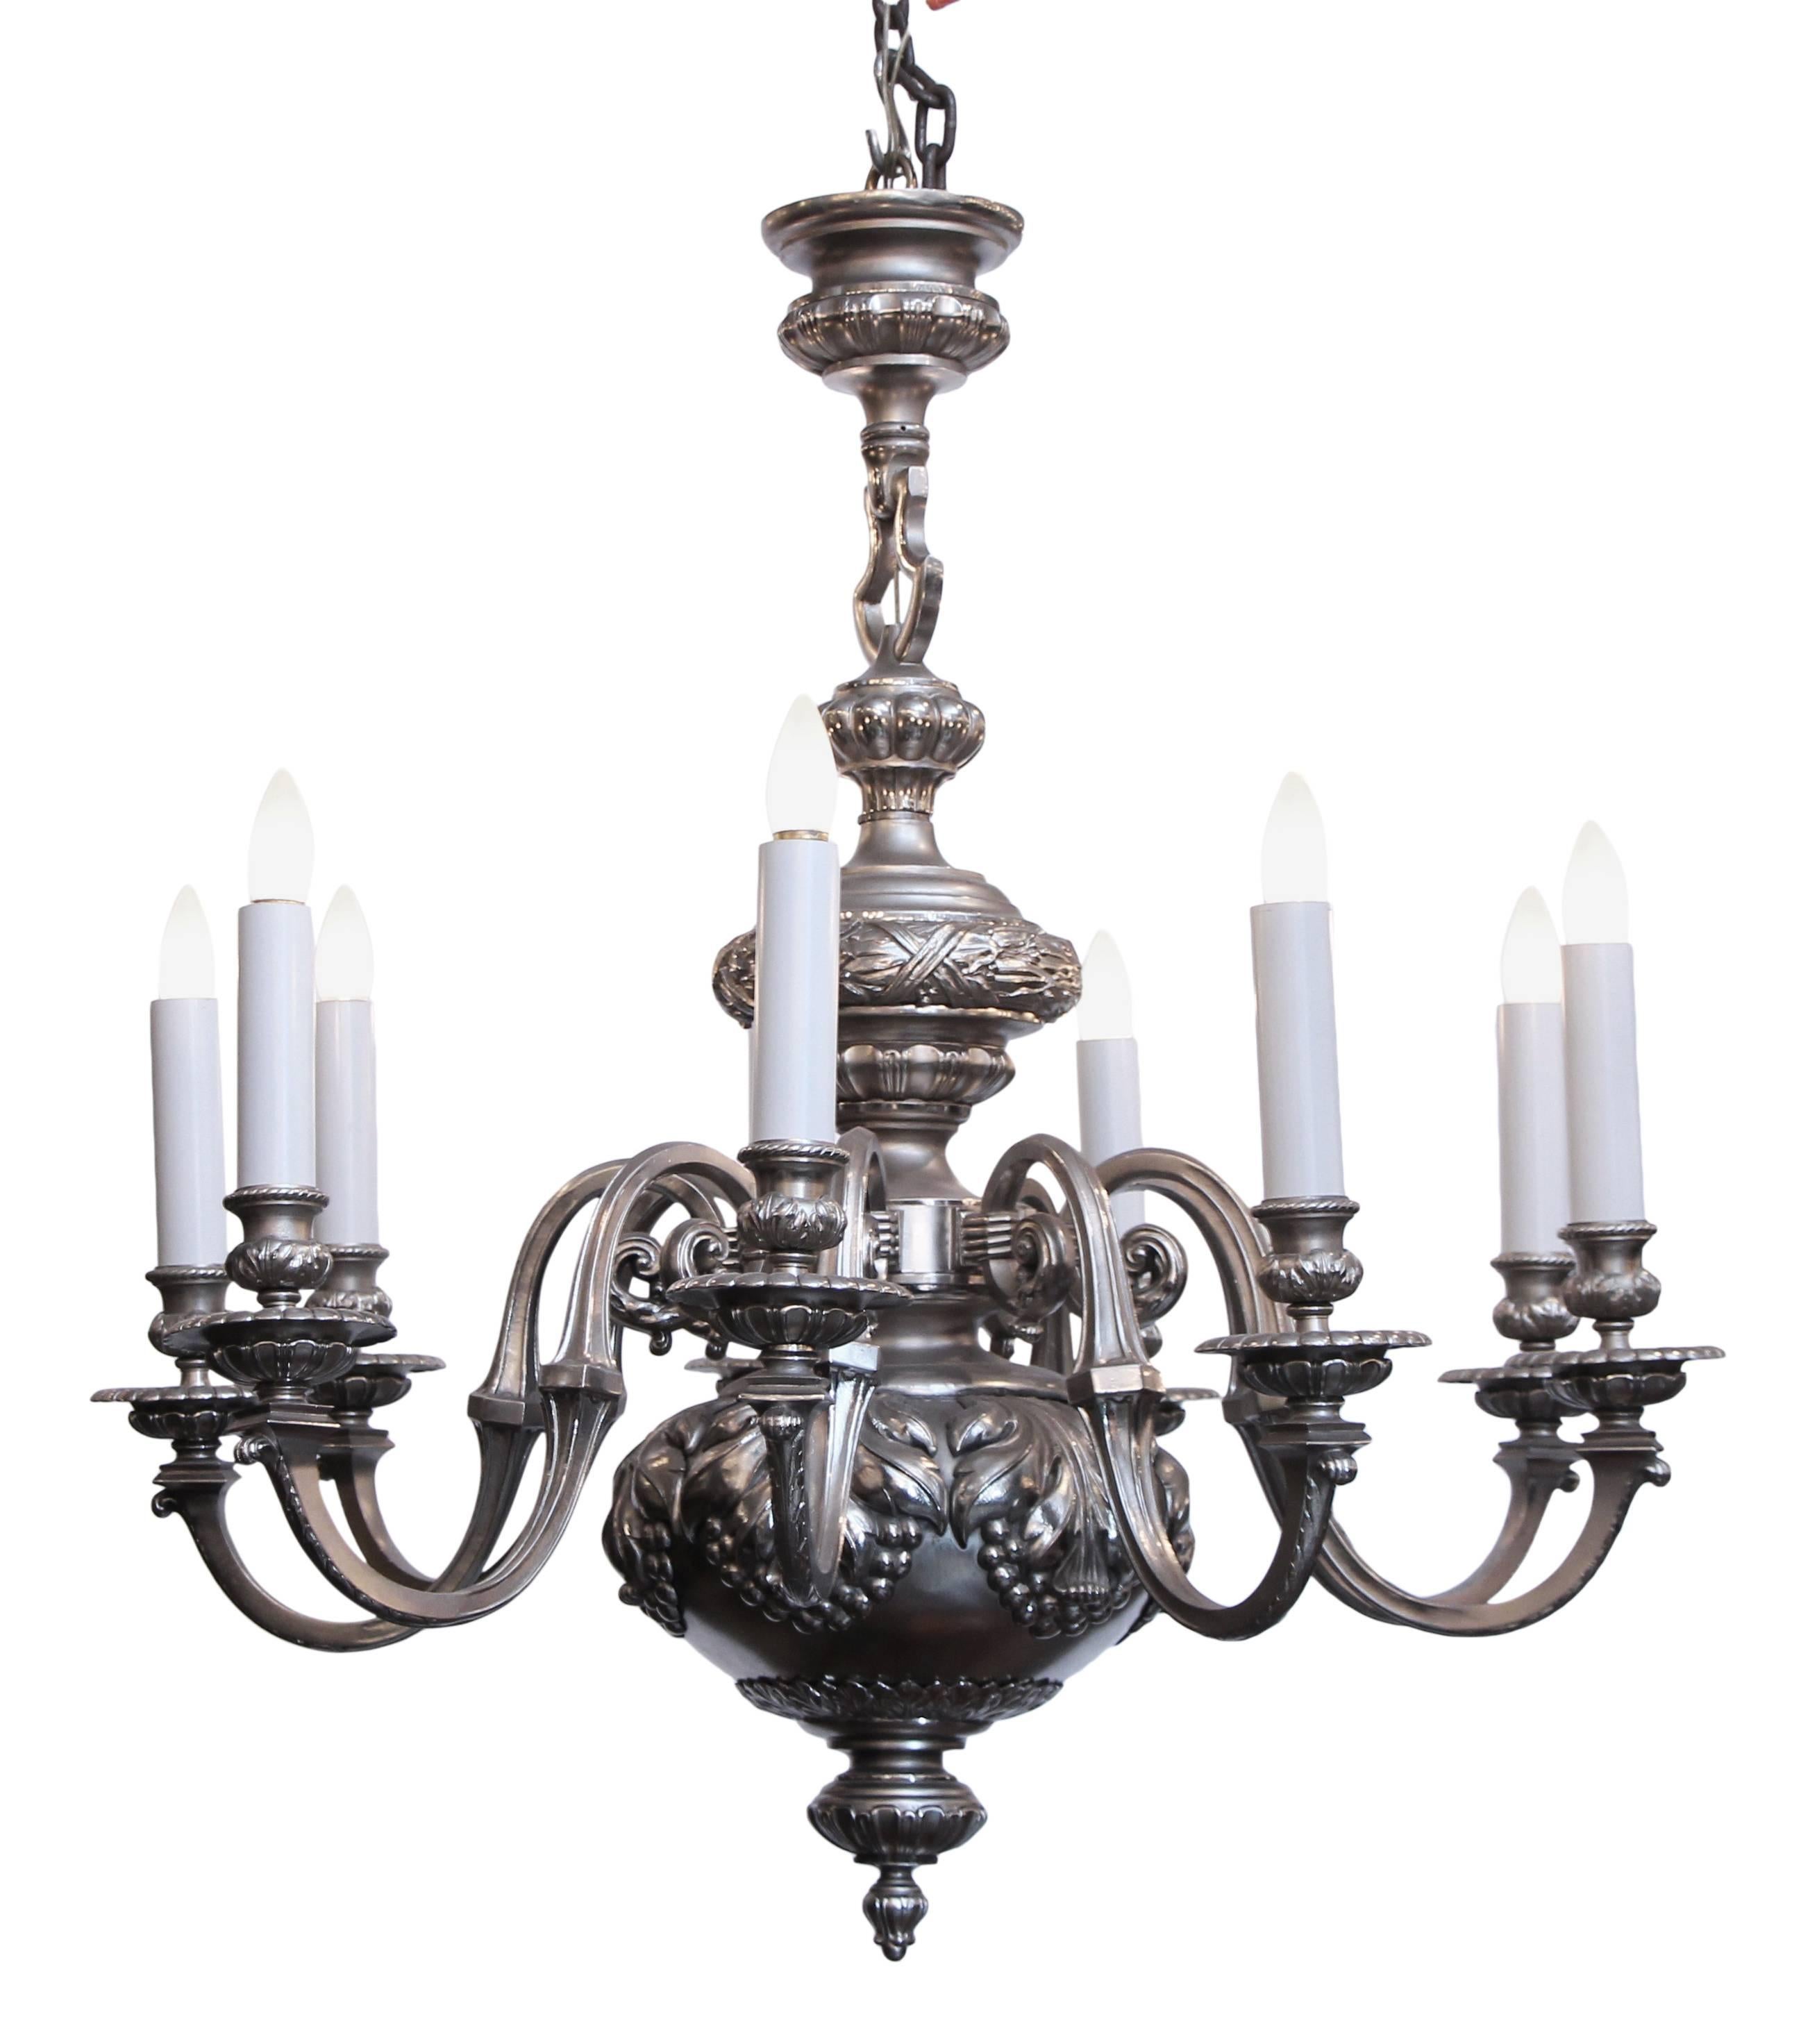 Silvered bronze chandelier with detailed laurel leaf and fruit castings. This is English made in the first quarter of the 20th century. 9 lights. Cleaned and rewired.  This can be seen at our 333 West 52nd St location in the Theater District West of